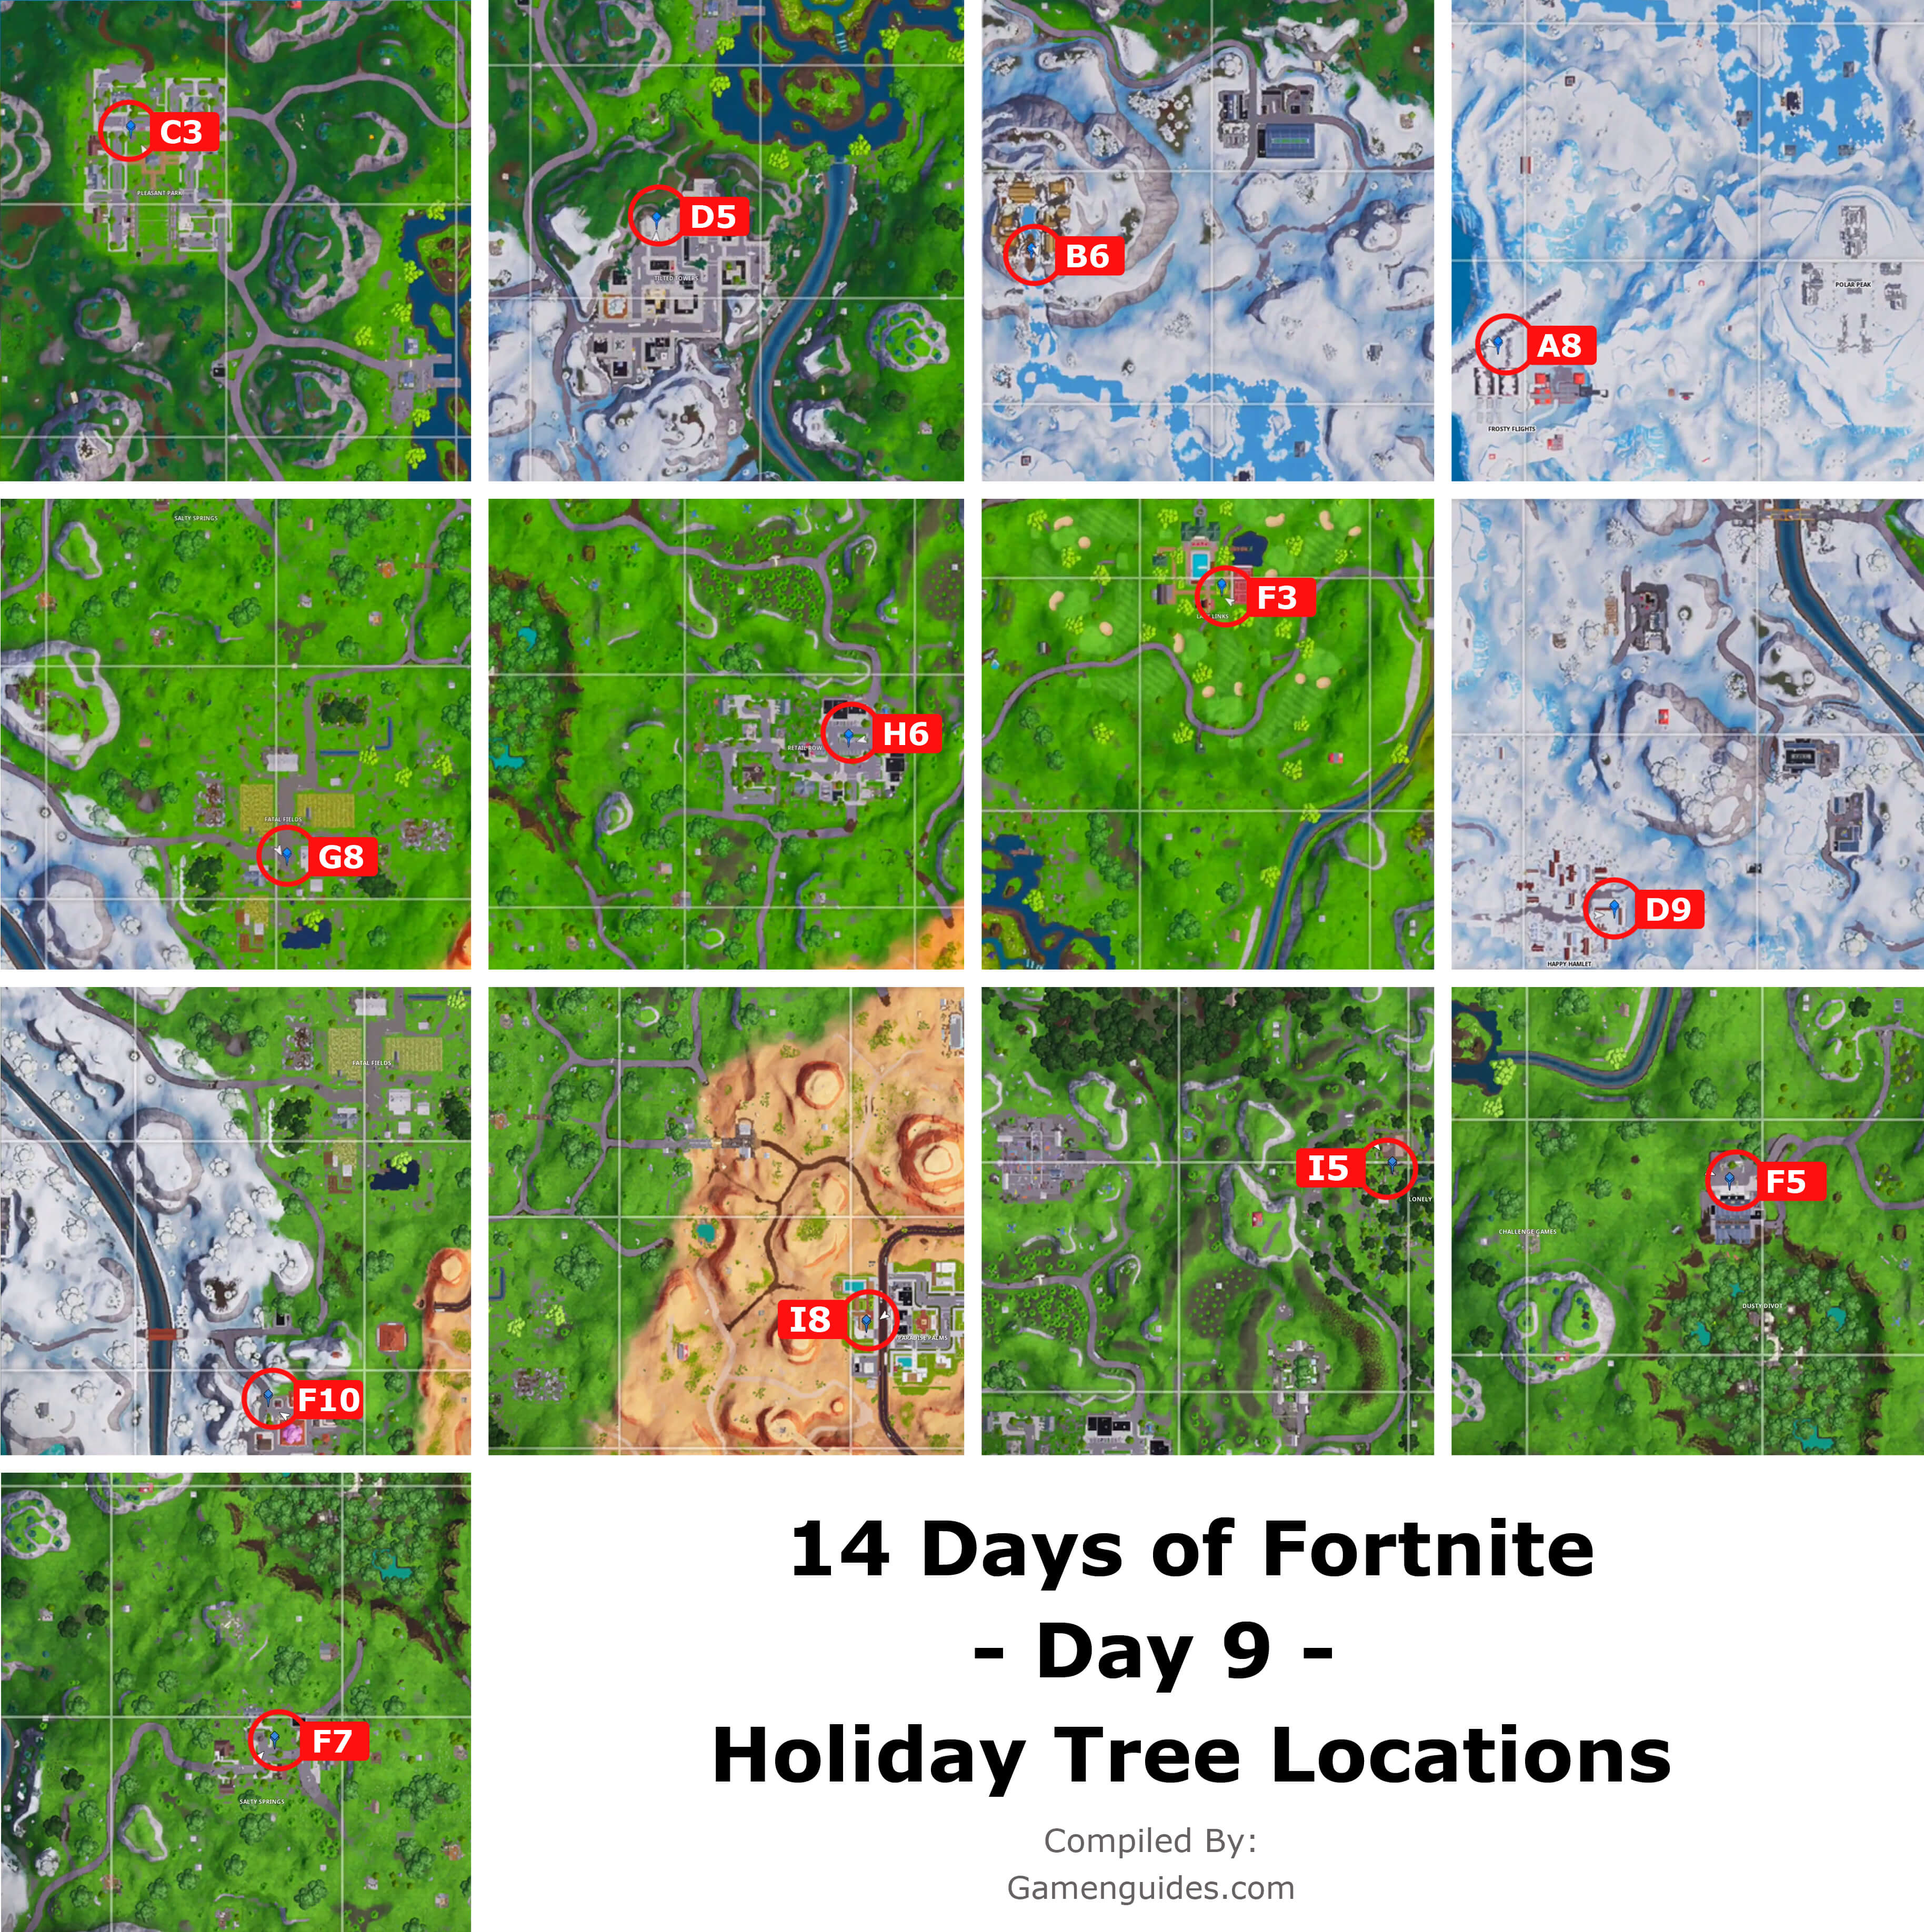 Fortnite Day 9: All Holiday Tree Locations (14 Days of Fortnite)